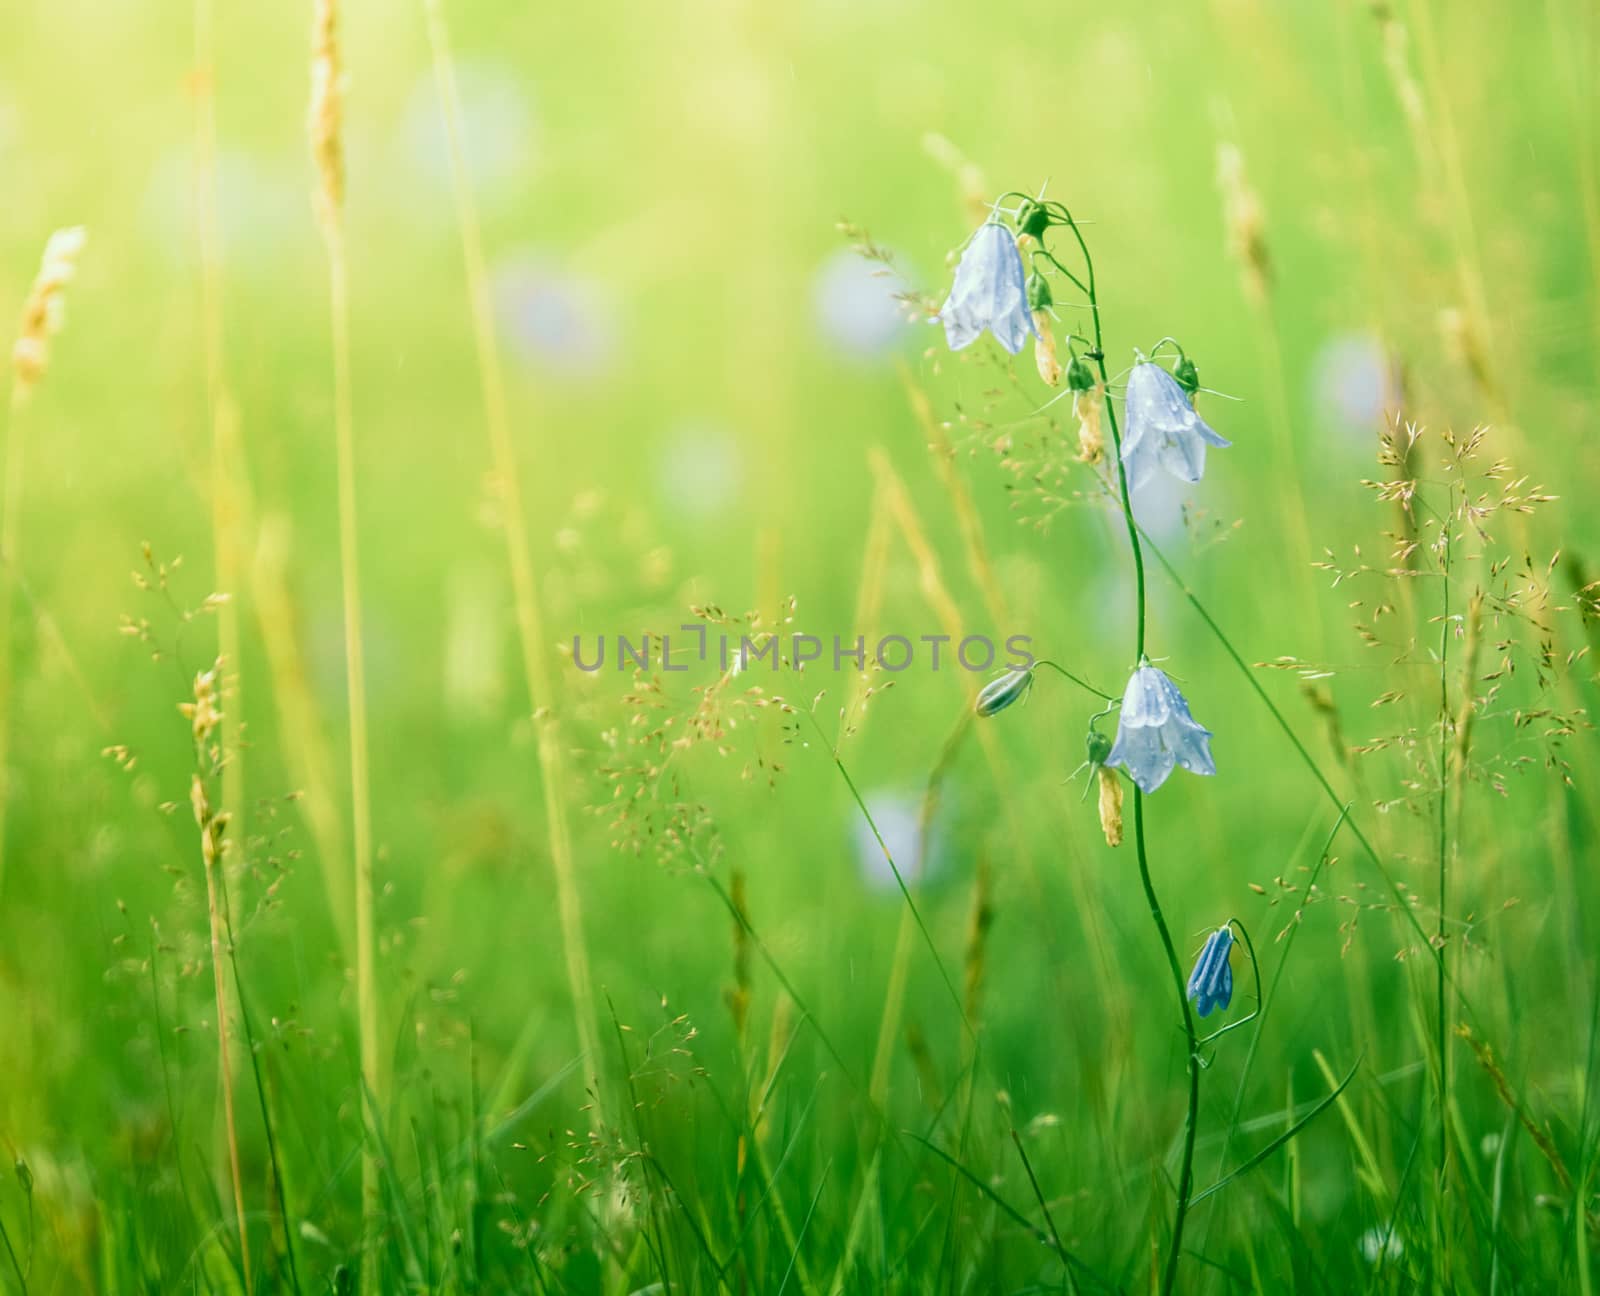 Retro Style Background Of Summer Flowers (Bluebells/Harebells) In Long Meadow Grass